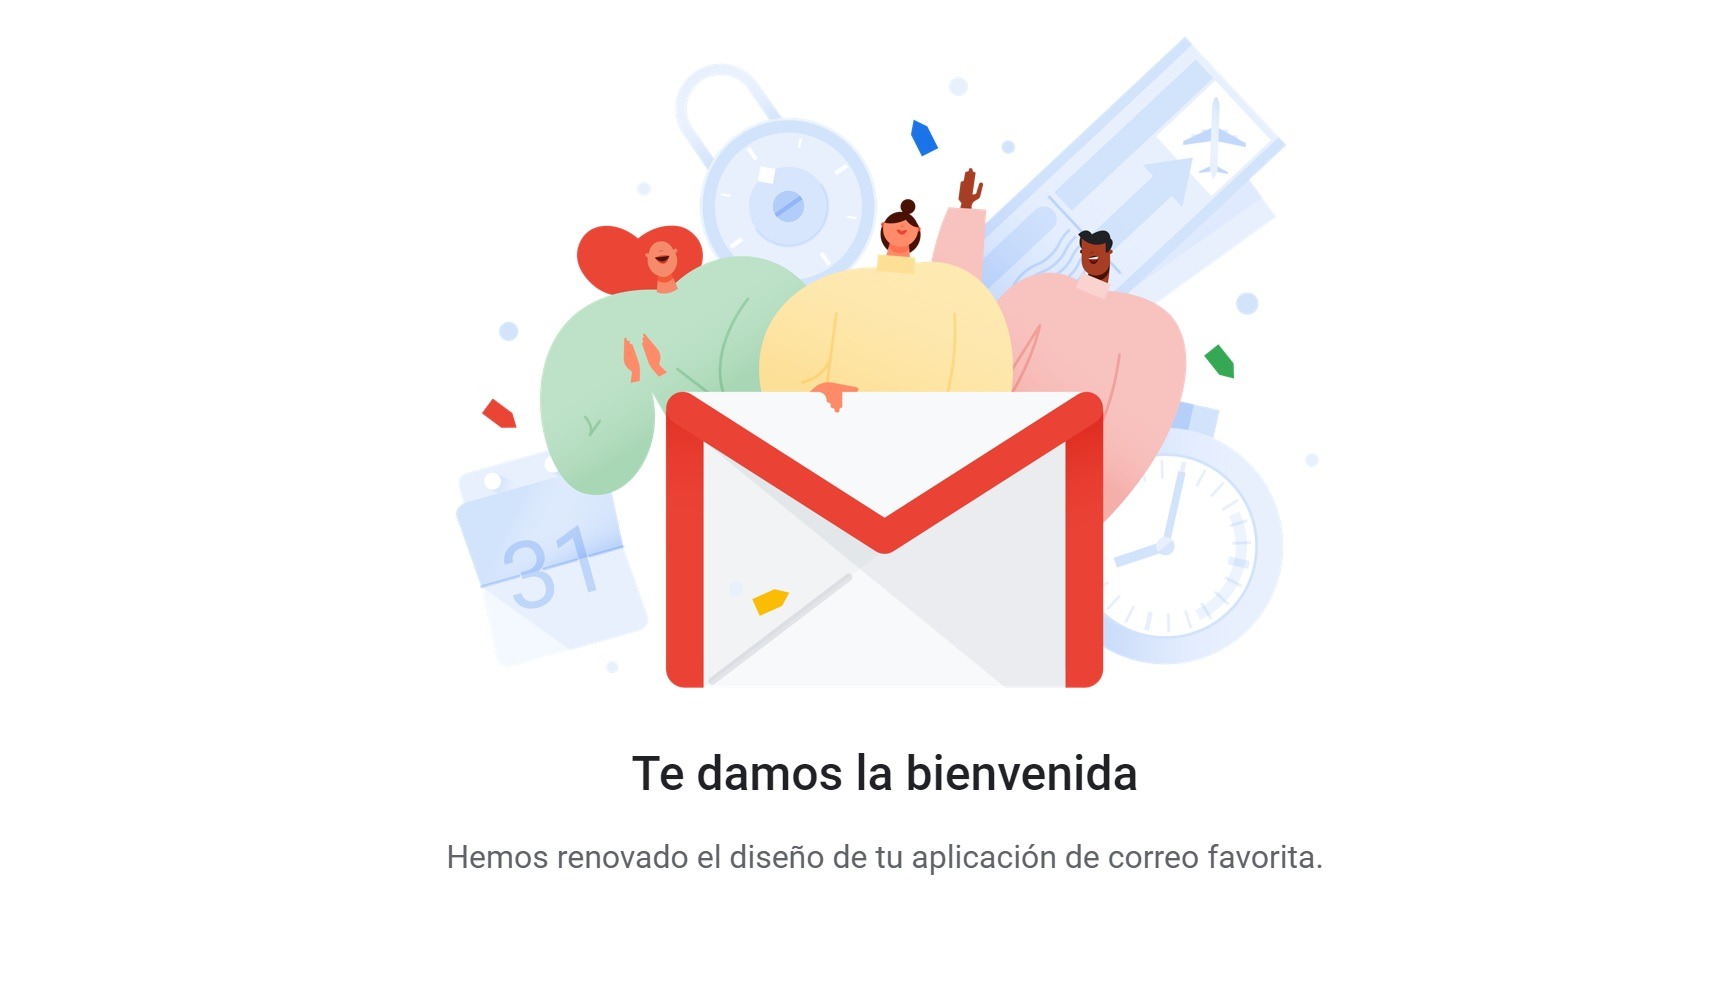 gmail max video email